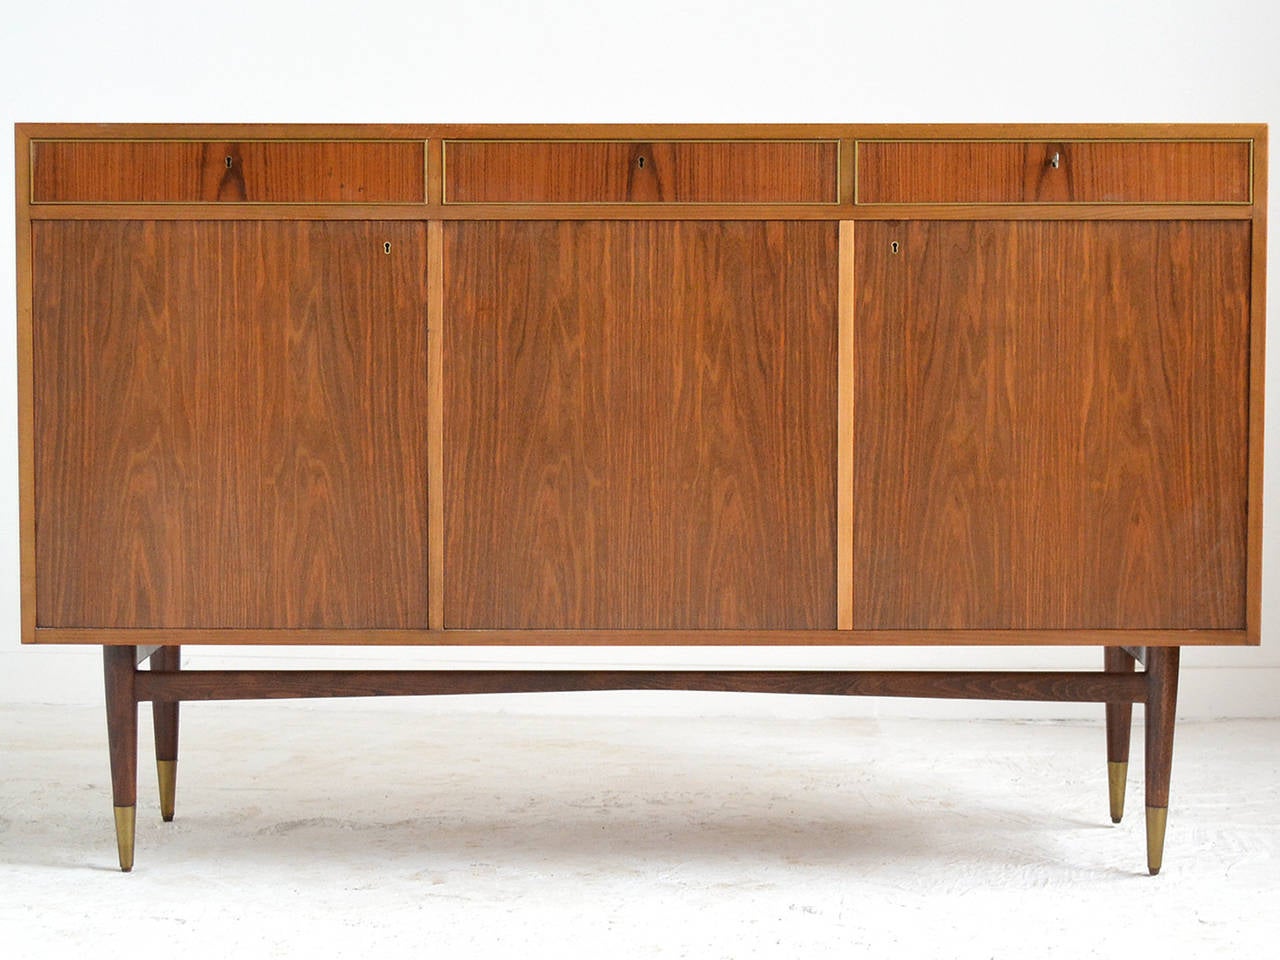 This Italian credenza or bar is a stunning piece. Perched on slender tapered legs with brass caps, the case is clad in a beautiful mix of woods. It appears to be a combination of Italian walnut, fruitwood, and mahogany. There are a number of